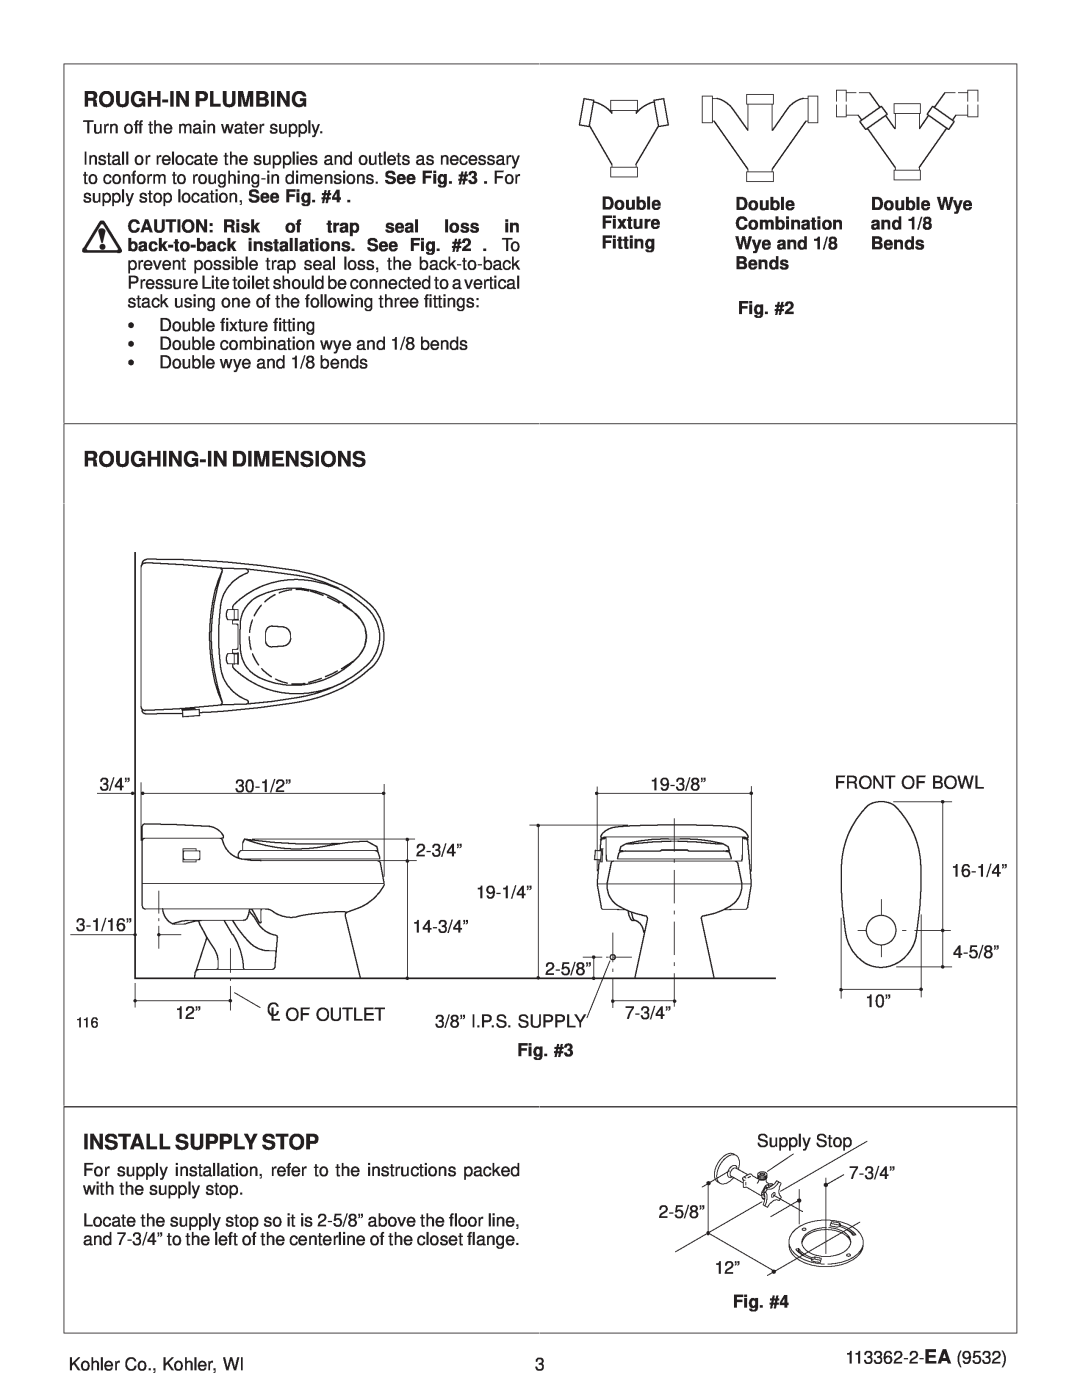 Kohler K-3394 Rough-Inplumbing, Roughing-Indimensions, Install Supply Stop, CAUTION Risk of trap seal loss in, Double 